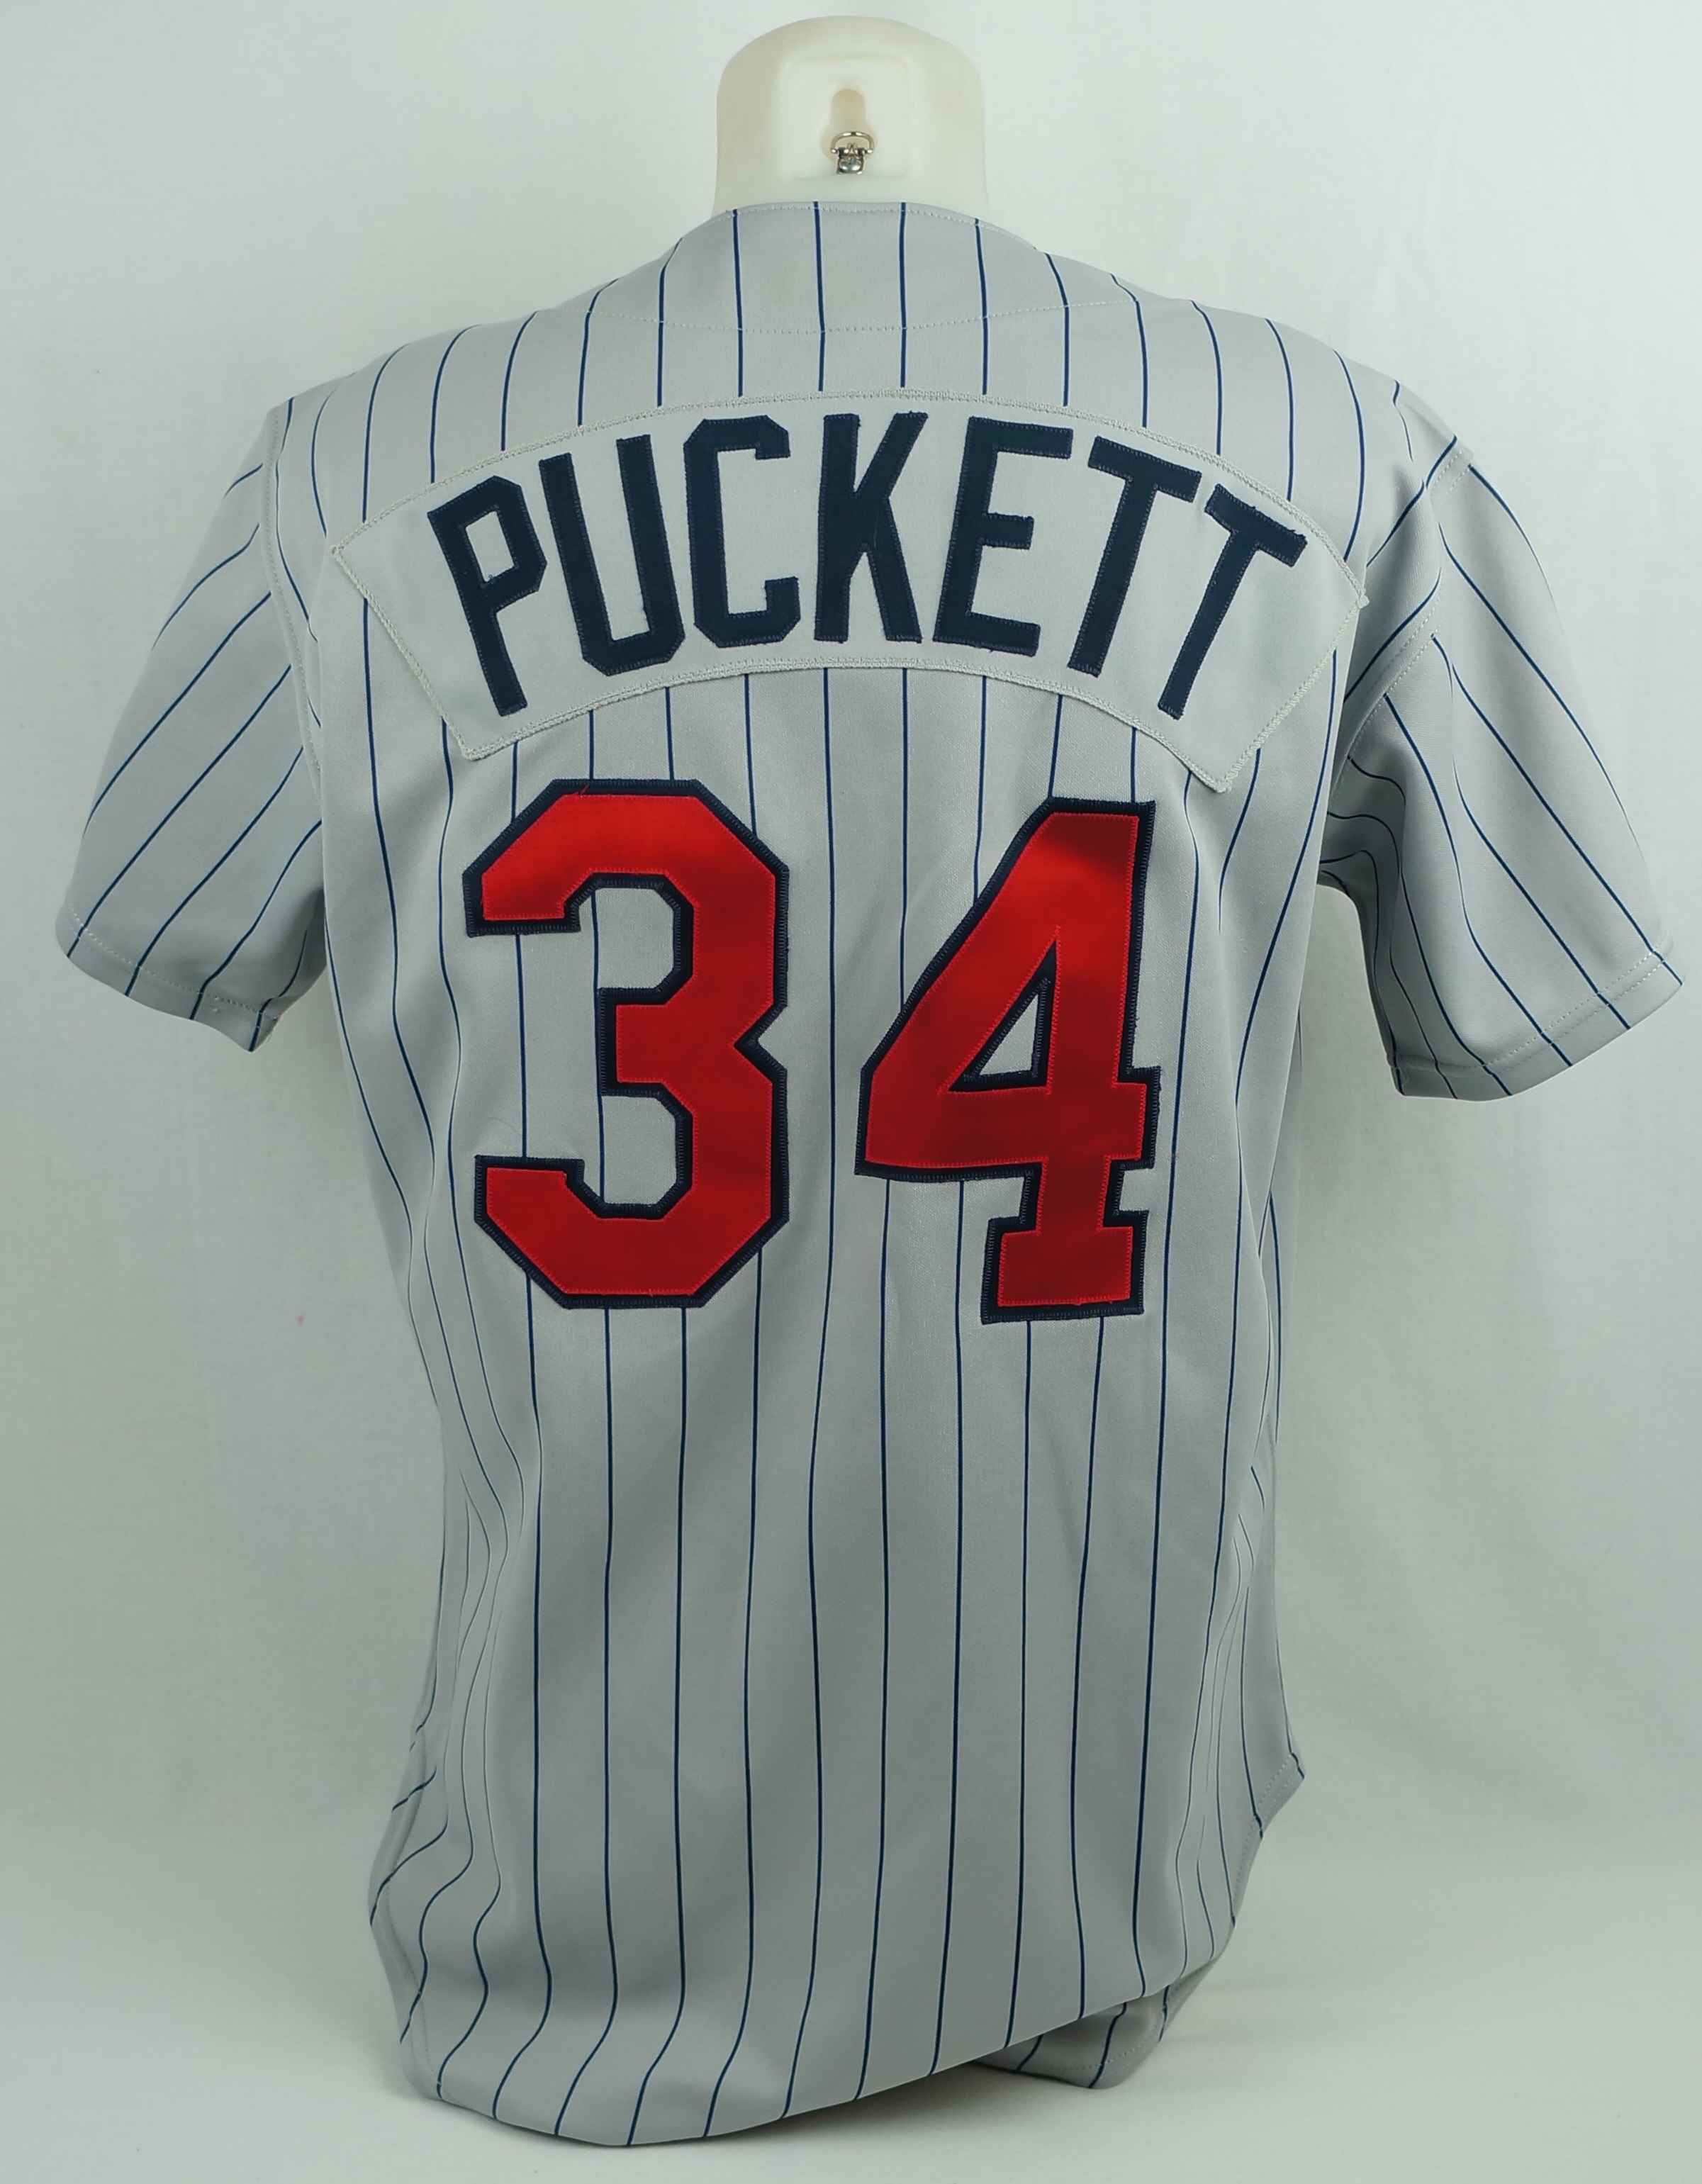 Kirby Puckett memorabilia goes up for auction, Game 6 jersey included